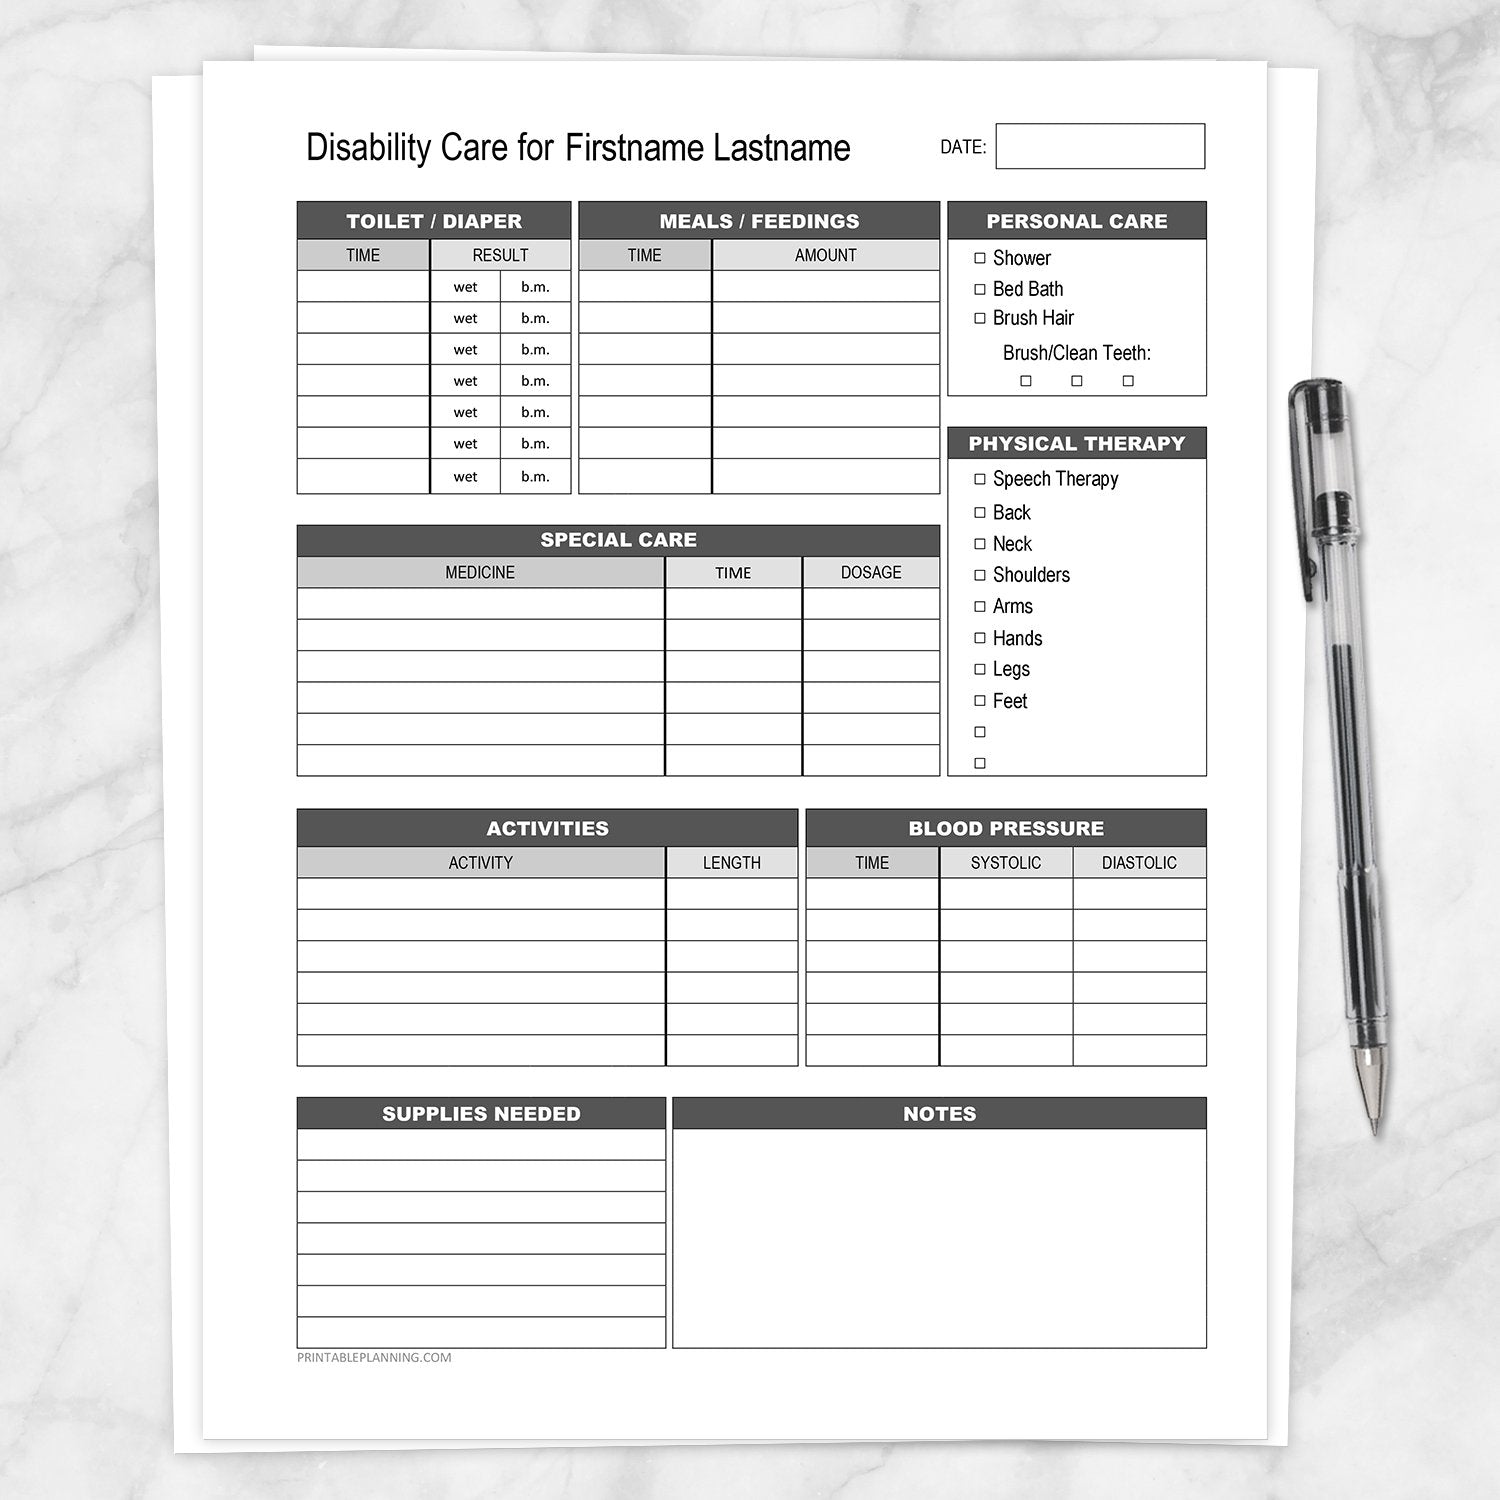 Printable Disability Care, Daily Care Sheet at Printable Planning